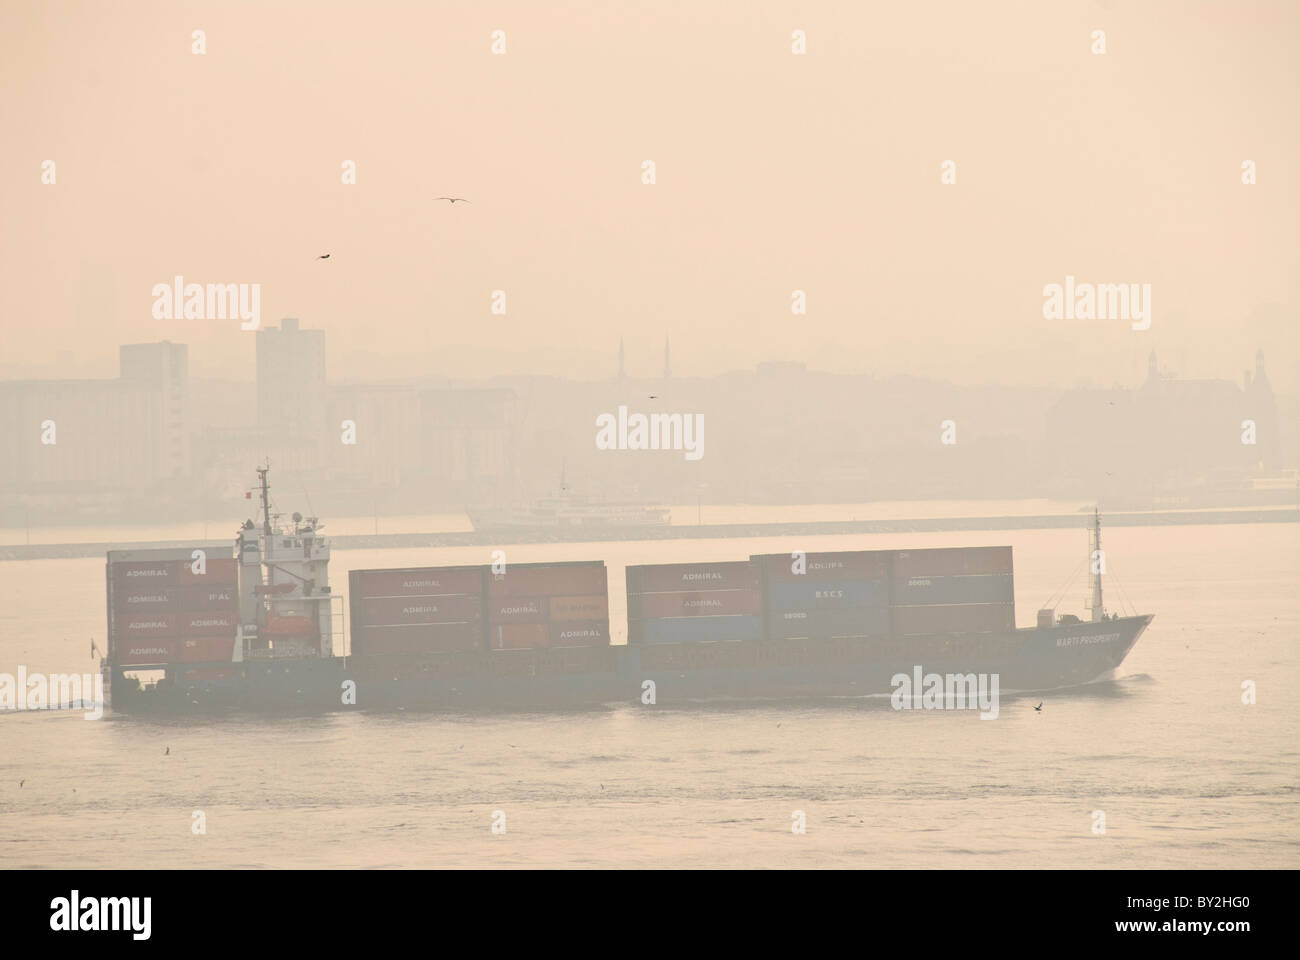 A large cargo ship passes through the narrow intersection of the Sea of Marmara, the Golden Horn, and the Bosphorus Strait, passing very close to shore in Istanbul, Turkey. Stock Photo